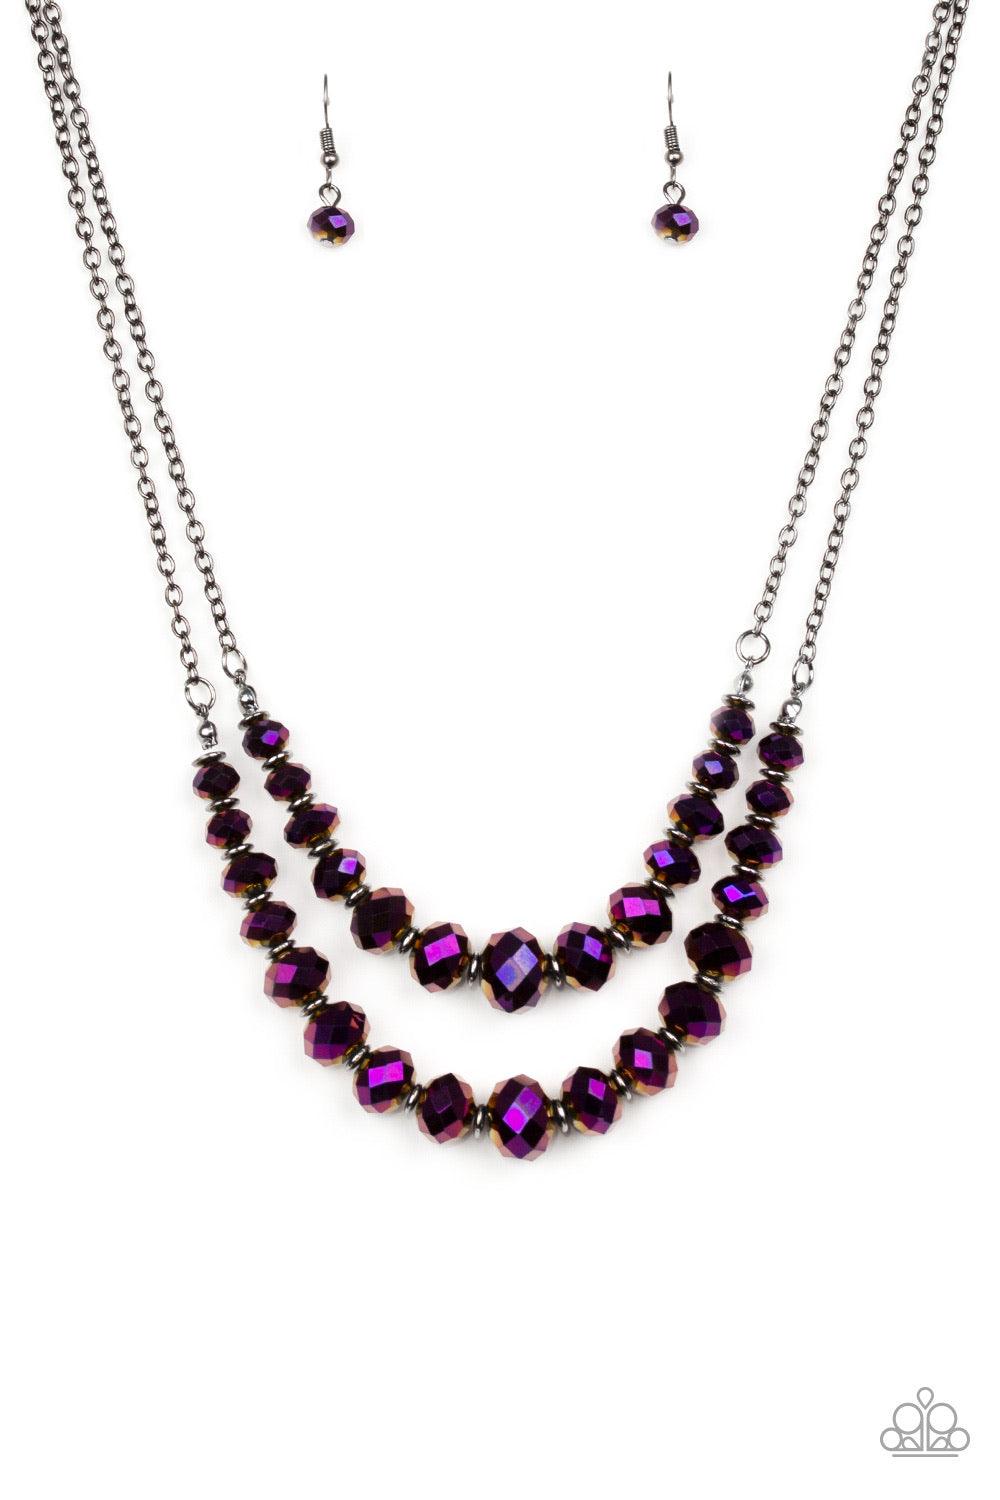 Paparazzi Accessories Strikingly Spellbinding - Purple Brushed in an iridescent shimmer, metallic purple gems are threaded along invisible wires, creating gorgeous layers beneath the collar. The glittery gems gradually increase in size near the center for